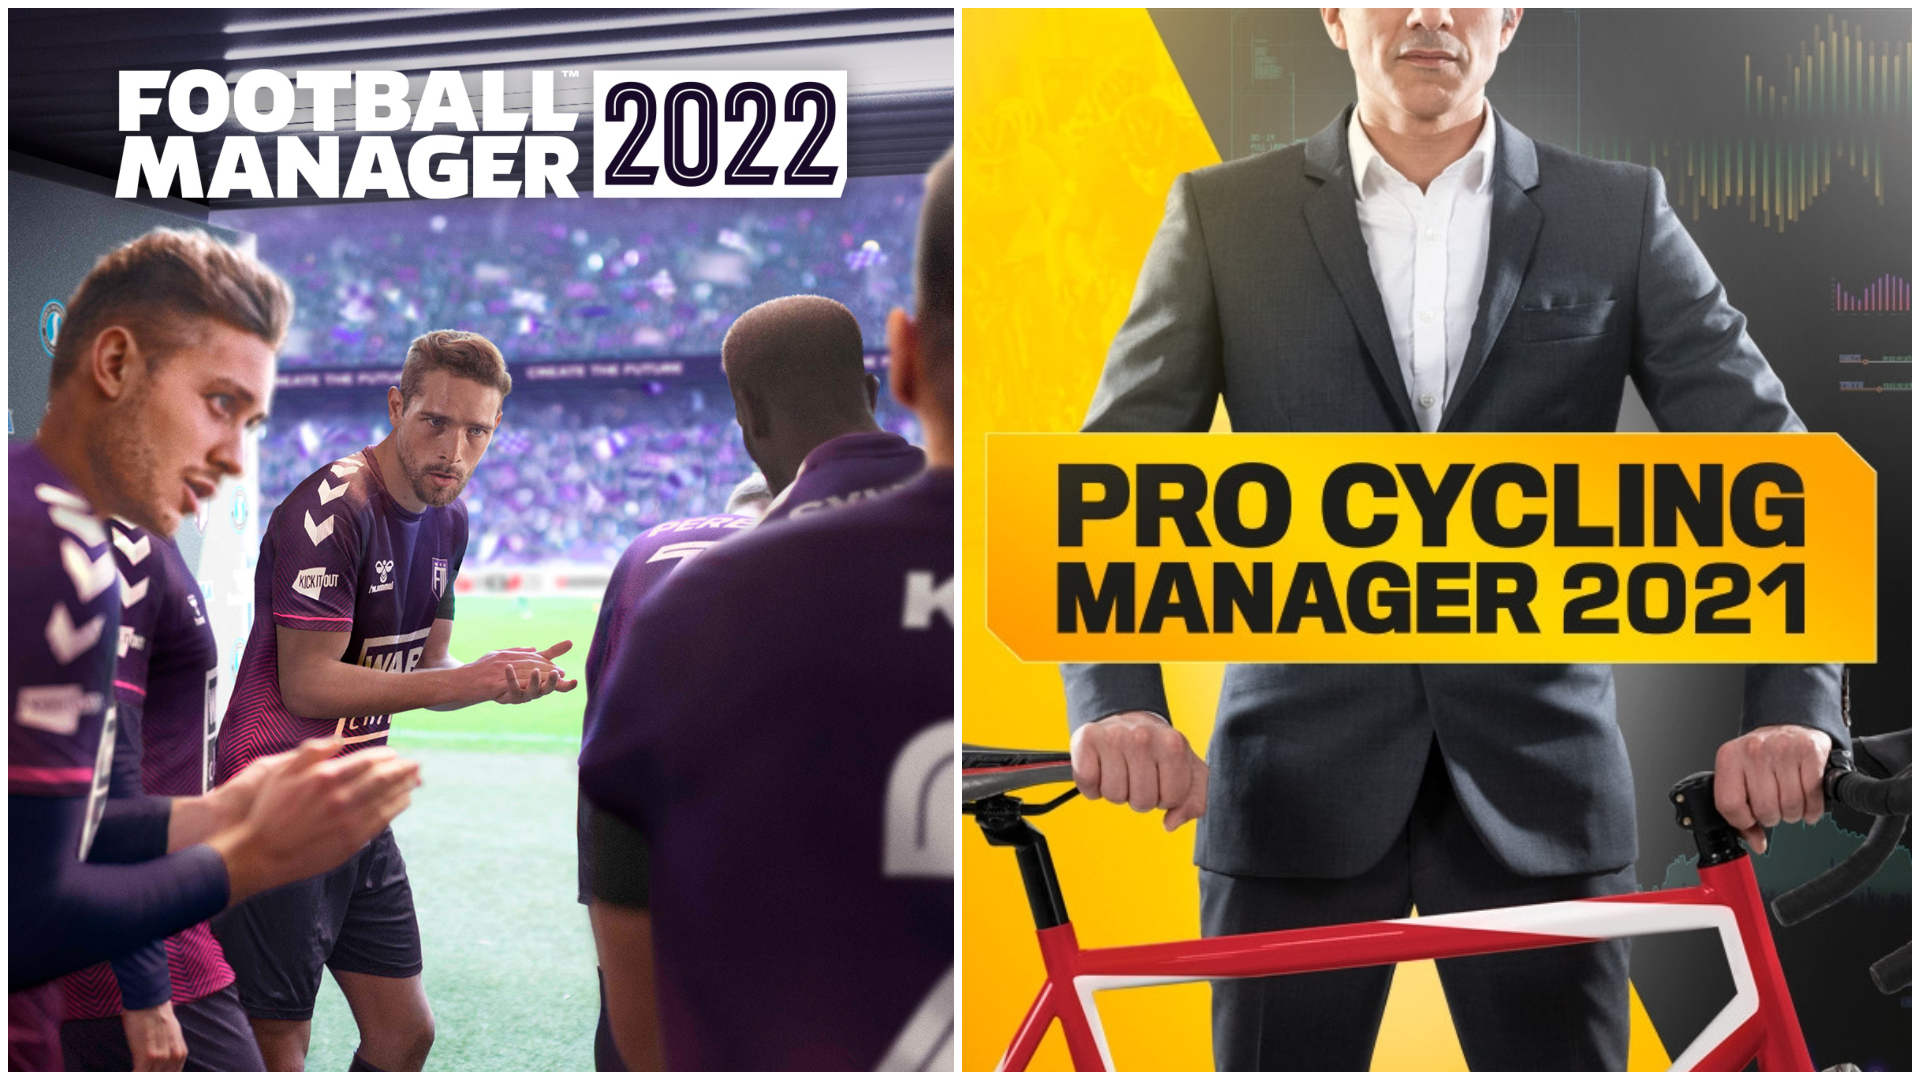 FM 2022 y Pro Cycling Manager 2021